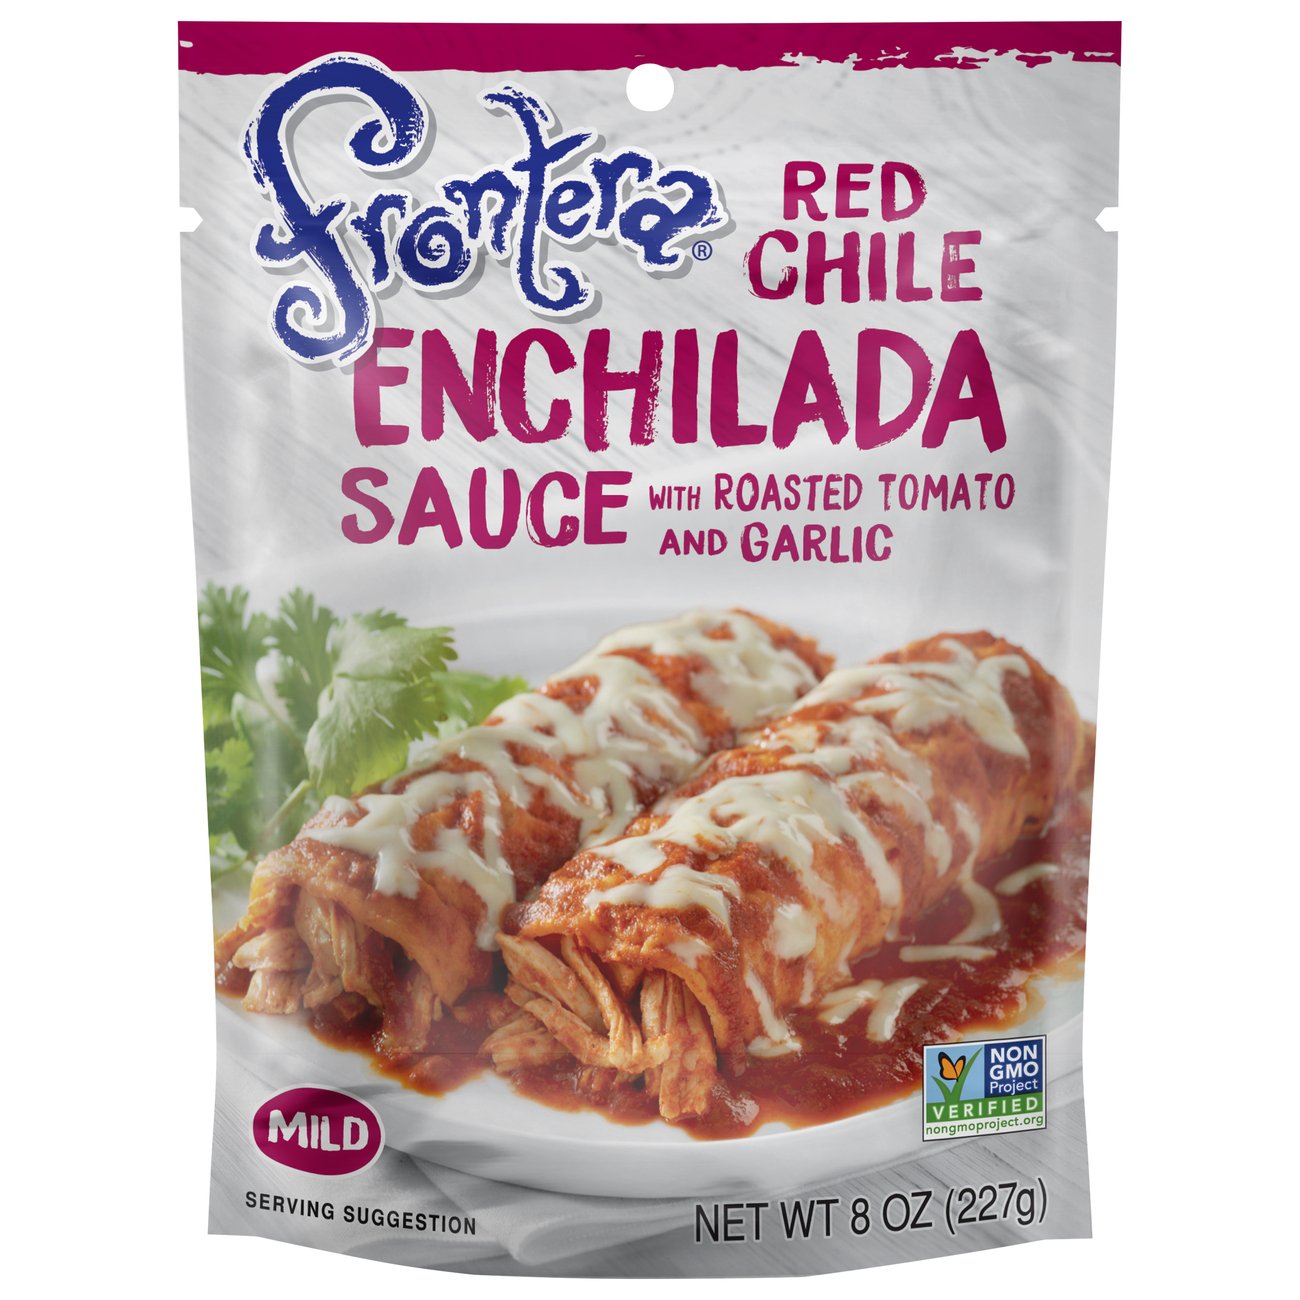 Frontera Mild Red Chile Enchilada Sauce - Shop Cooking Sauces at H-E-B